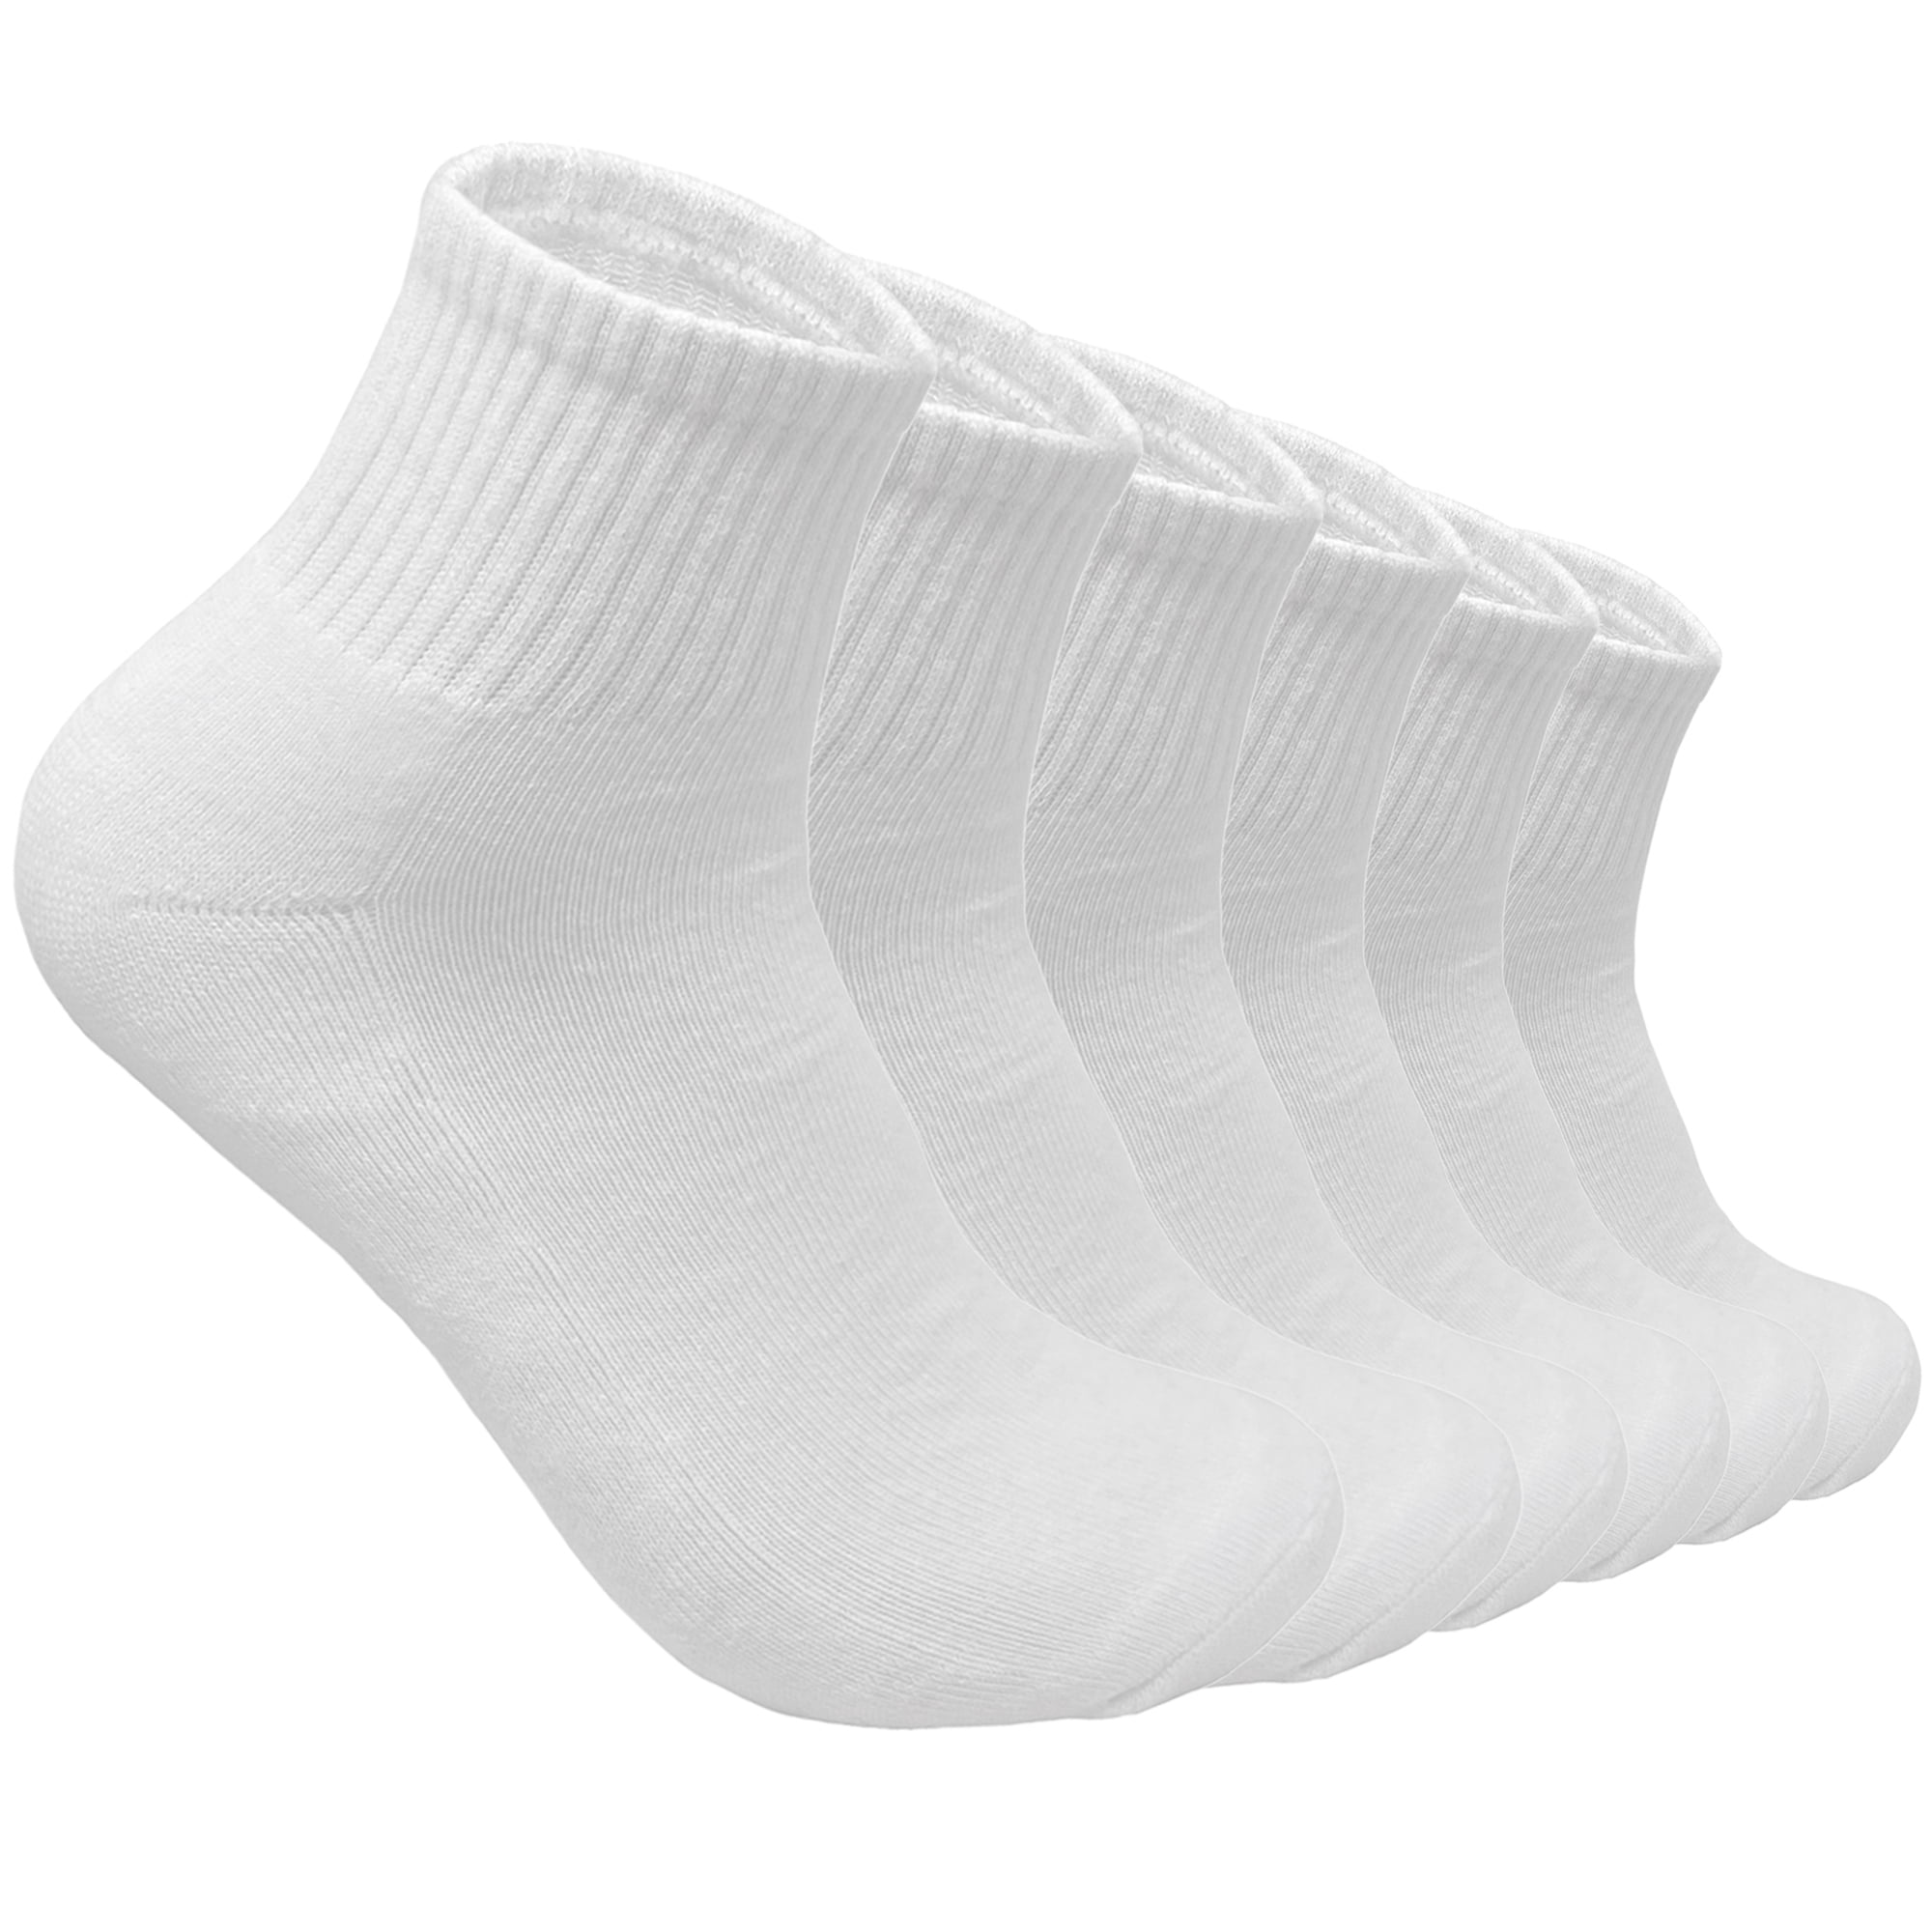 6 Pairs Men's Cotton Solid White Athletic Cushioned Ankle Quarter Socks  Size 9-11